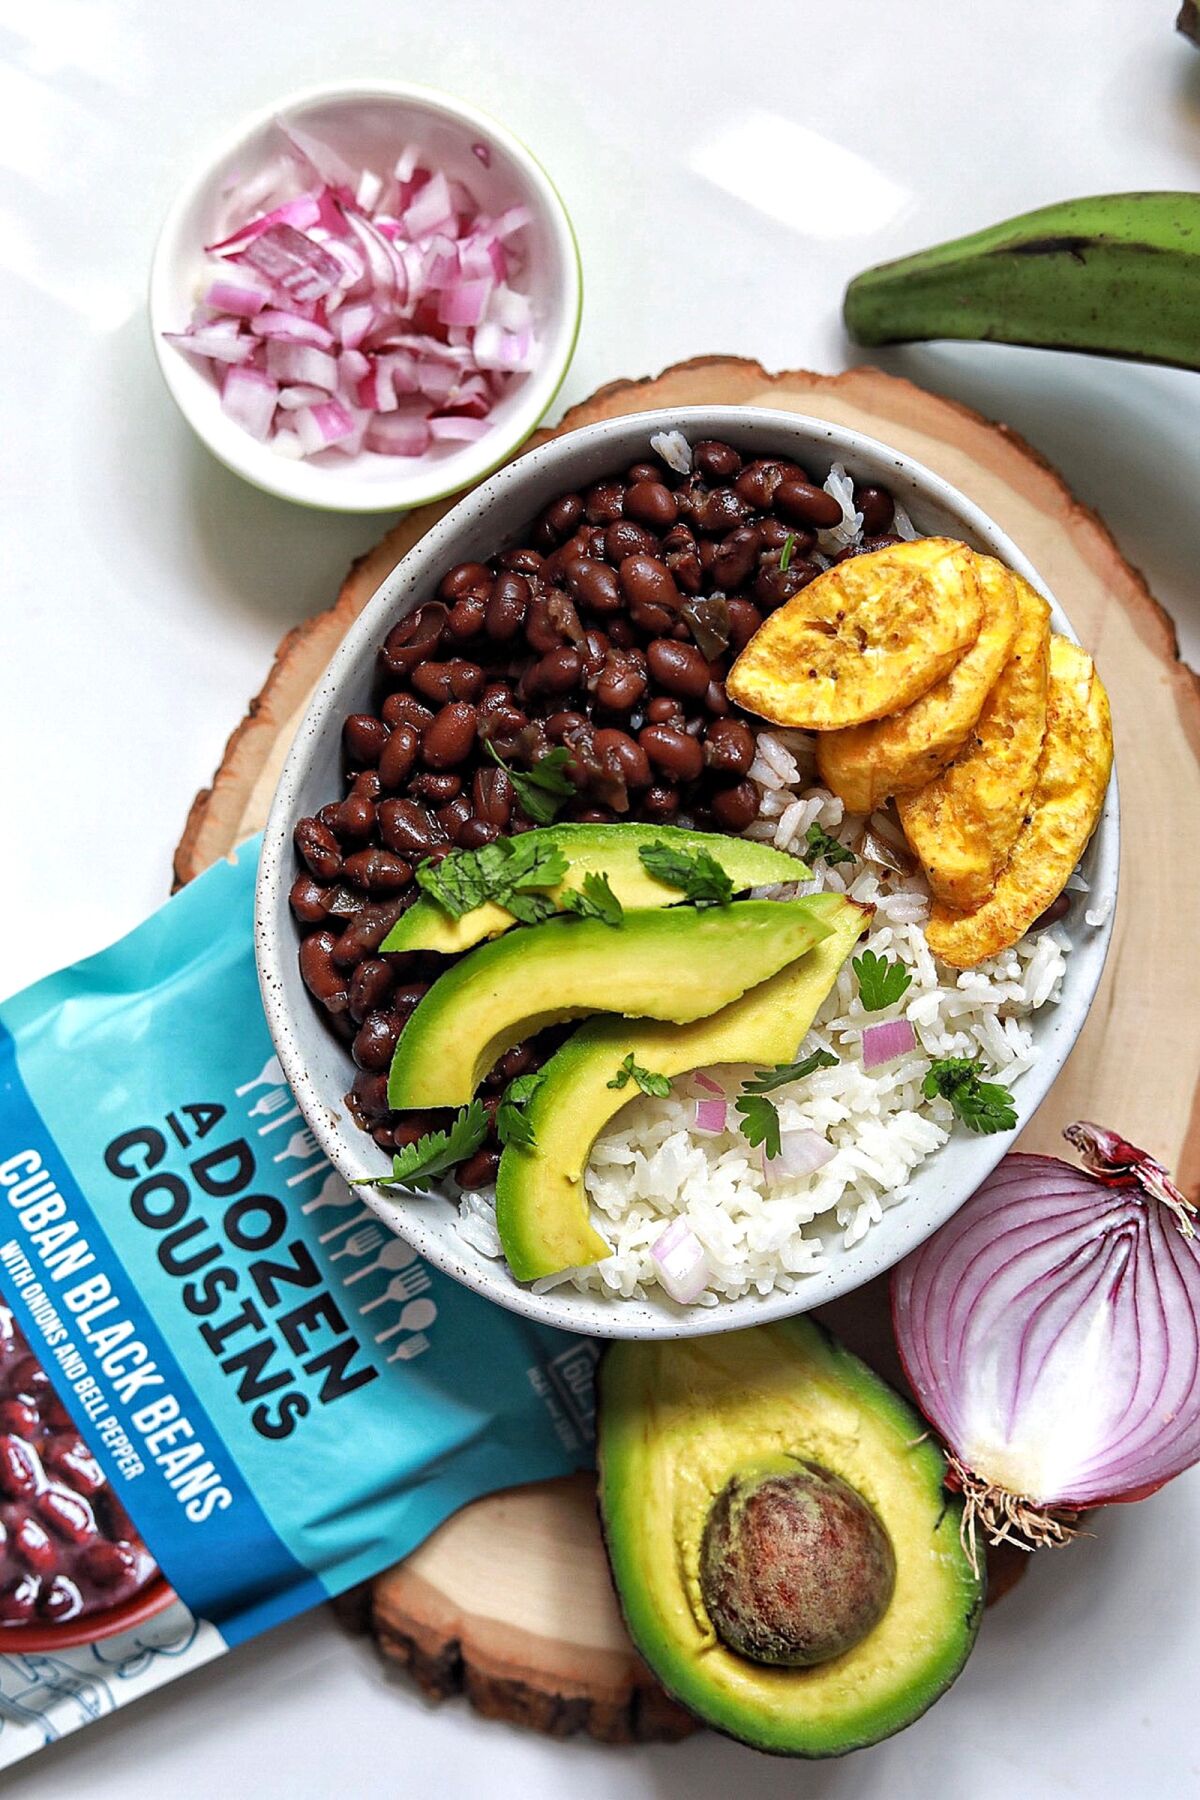 Beans with rice, plantains and avocado make a one-bowl meal.